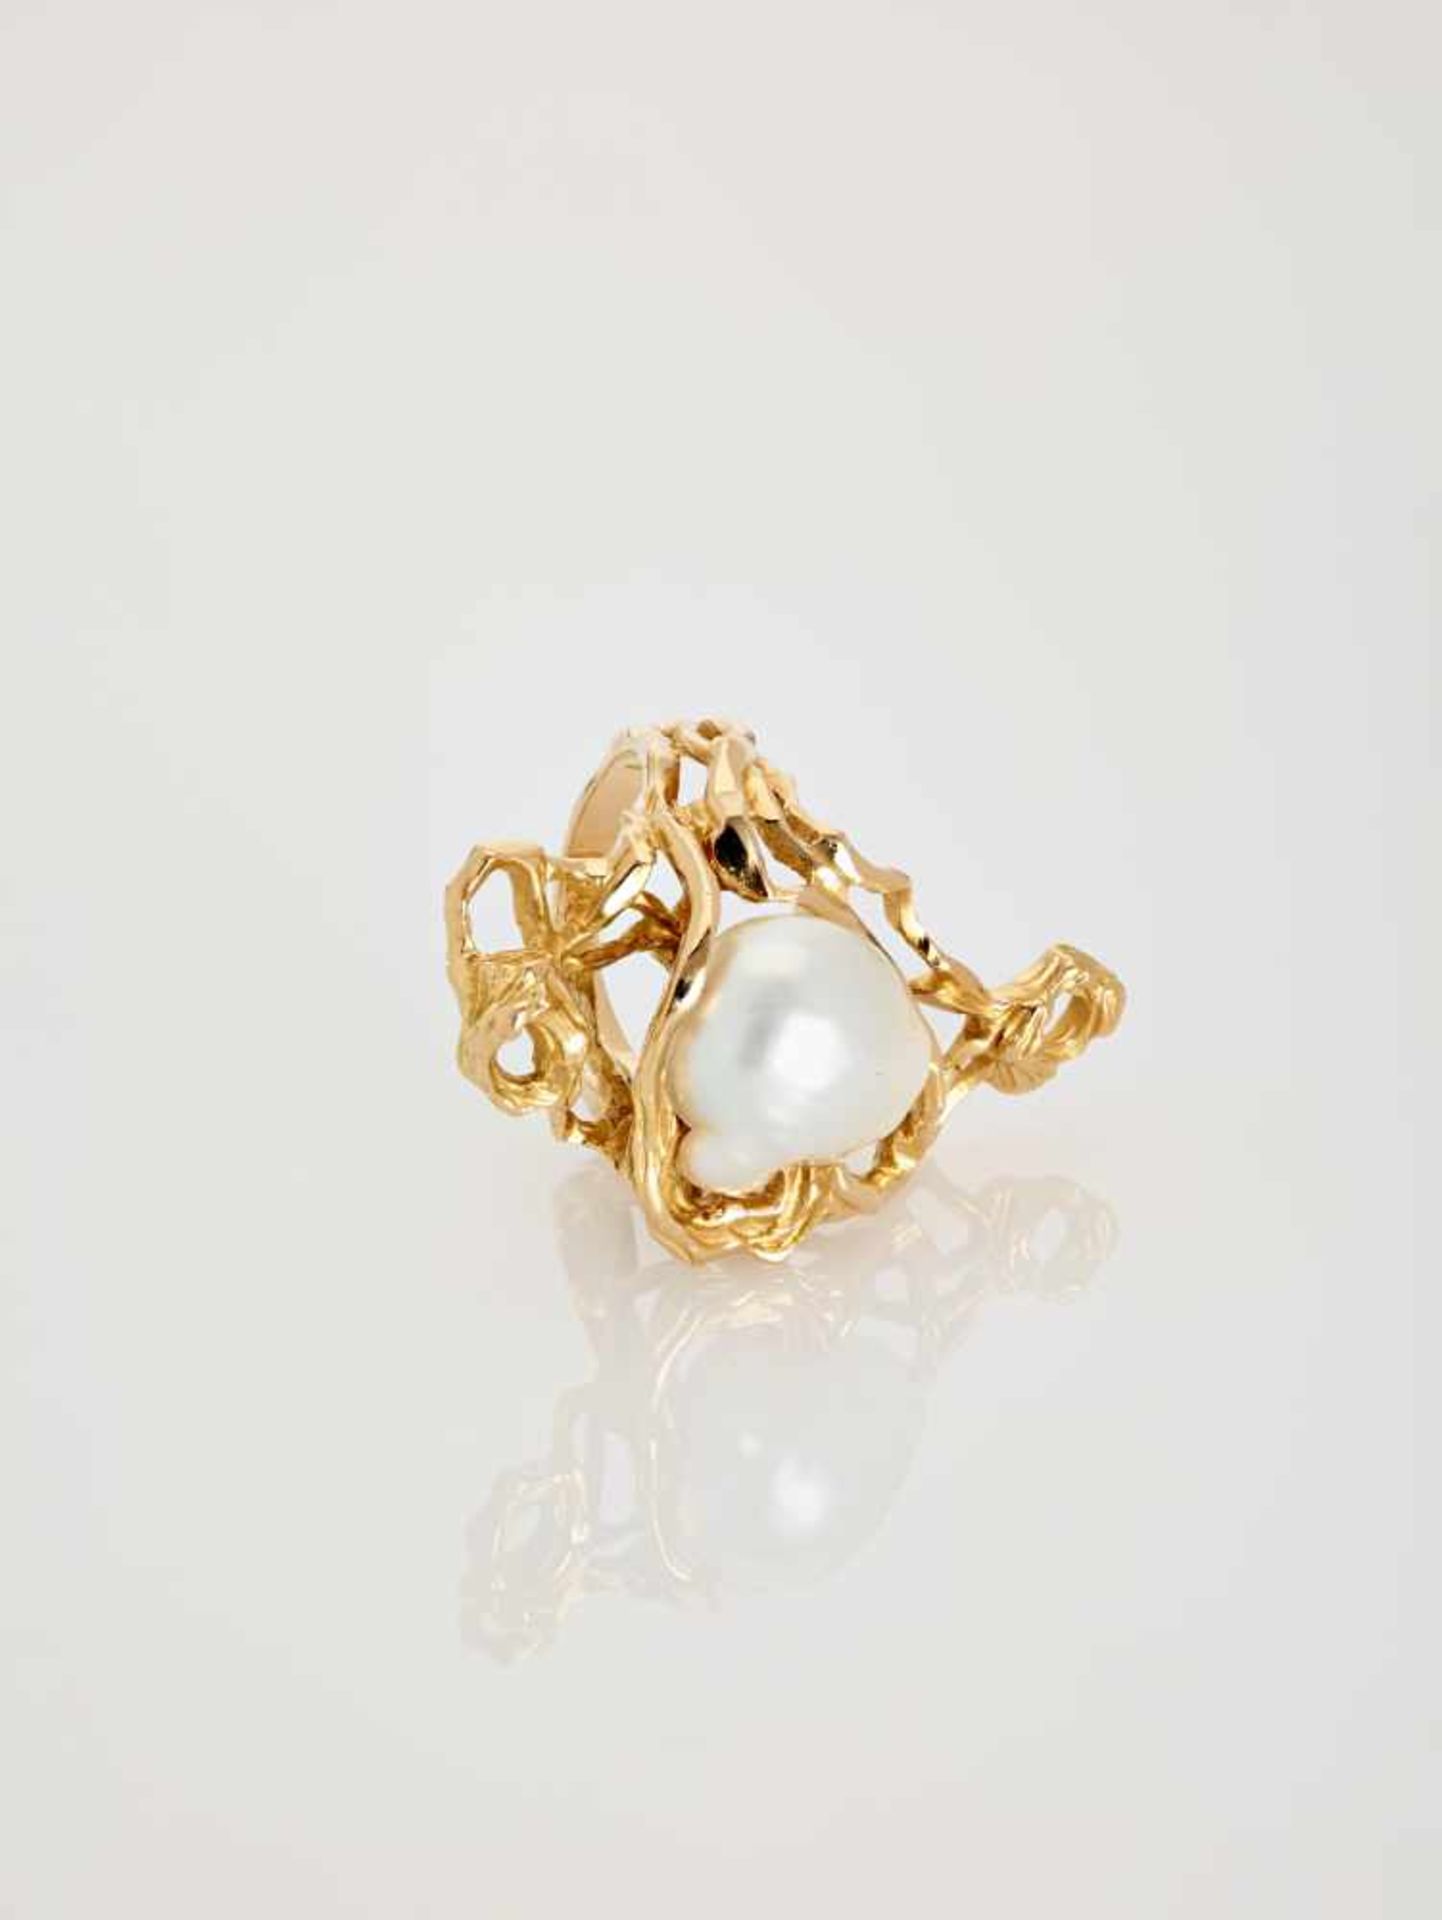 A GÜBELIN 18 CARAT GOLD RING WITH A 12 CARAT BAROQUE STYLE SOUTH-SEA PEARLSwitzerland1978, with - Image 3 of 8